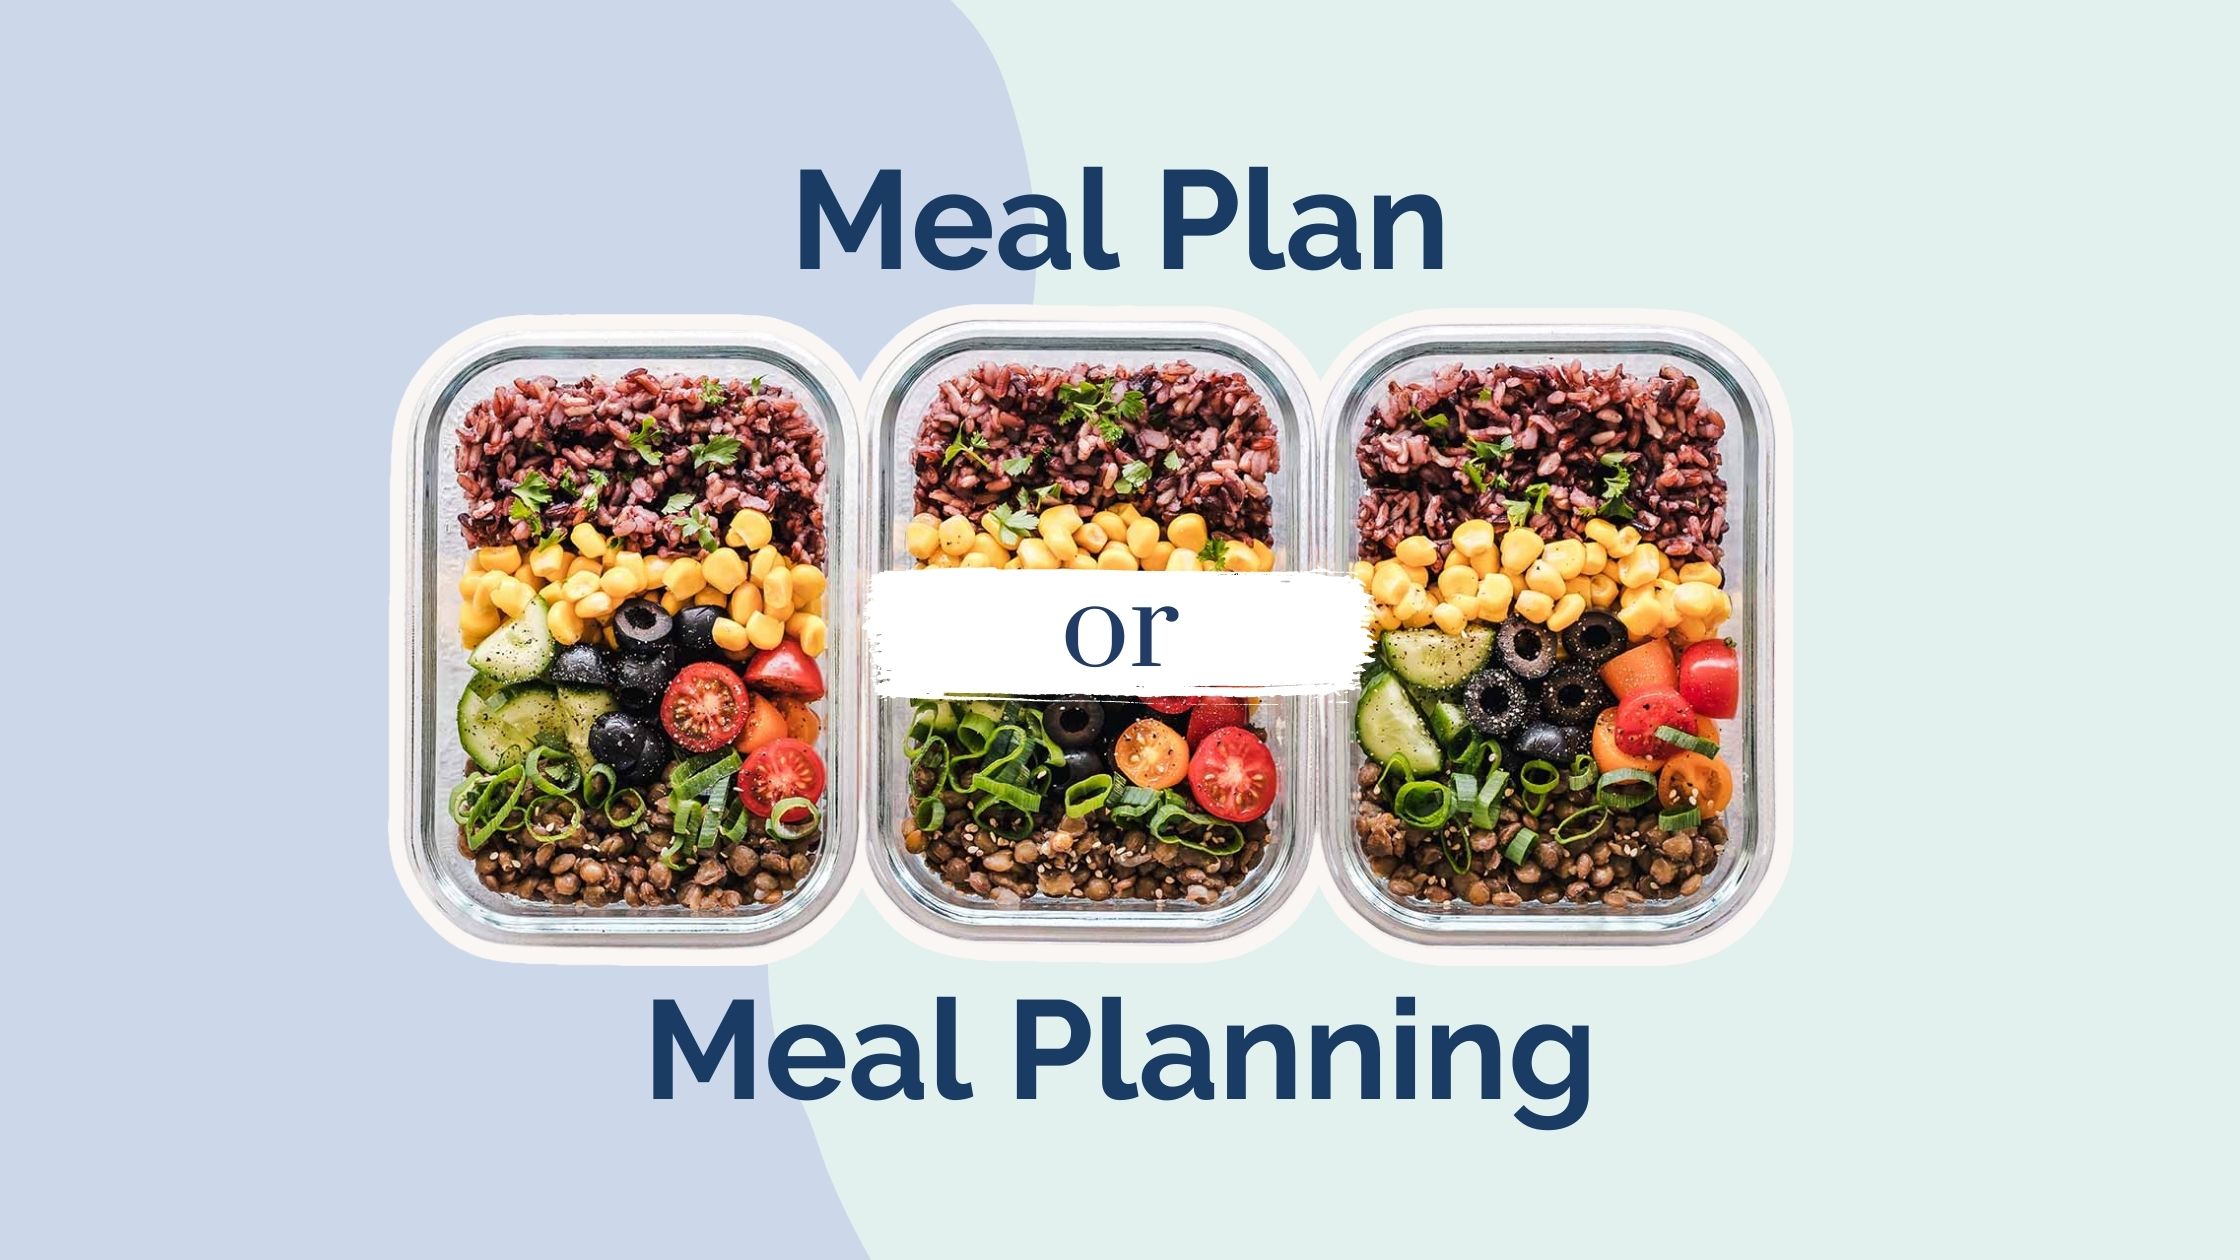 The important difference between meal plans and meal planning. Image: Pexels